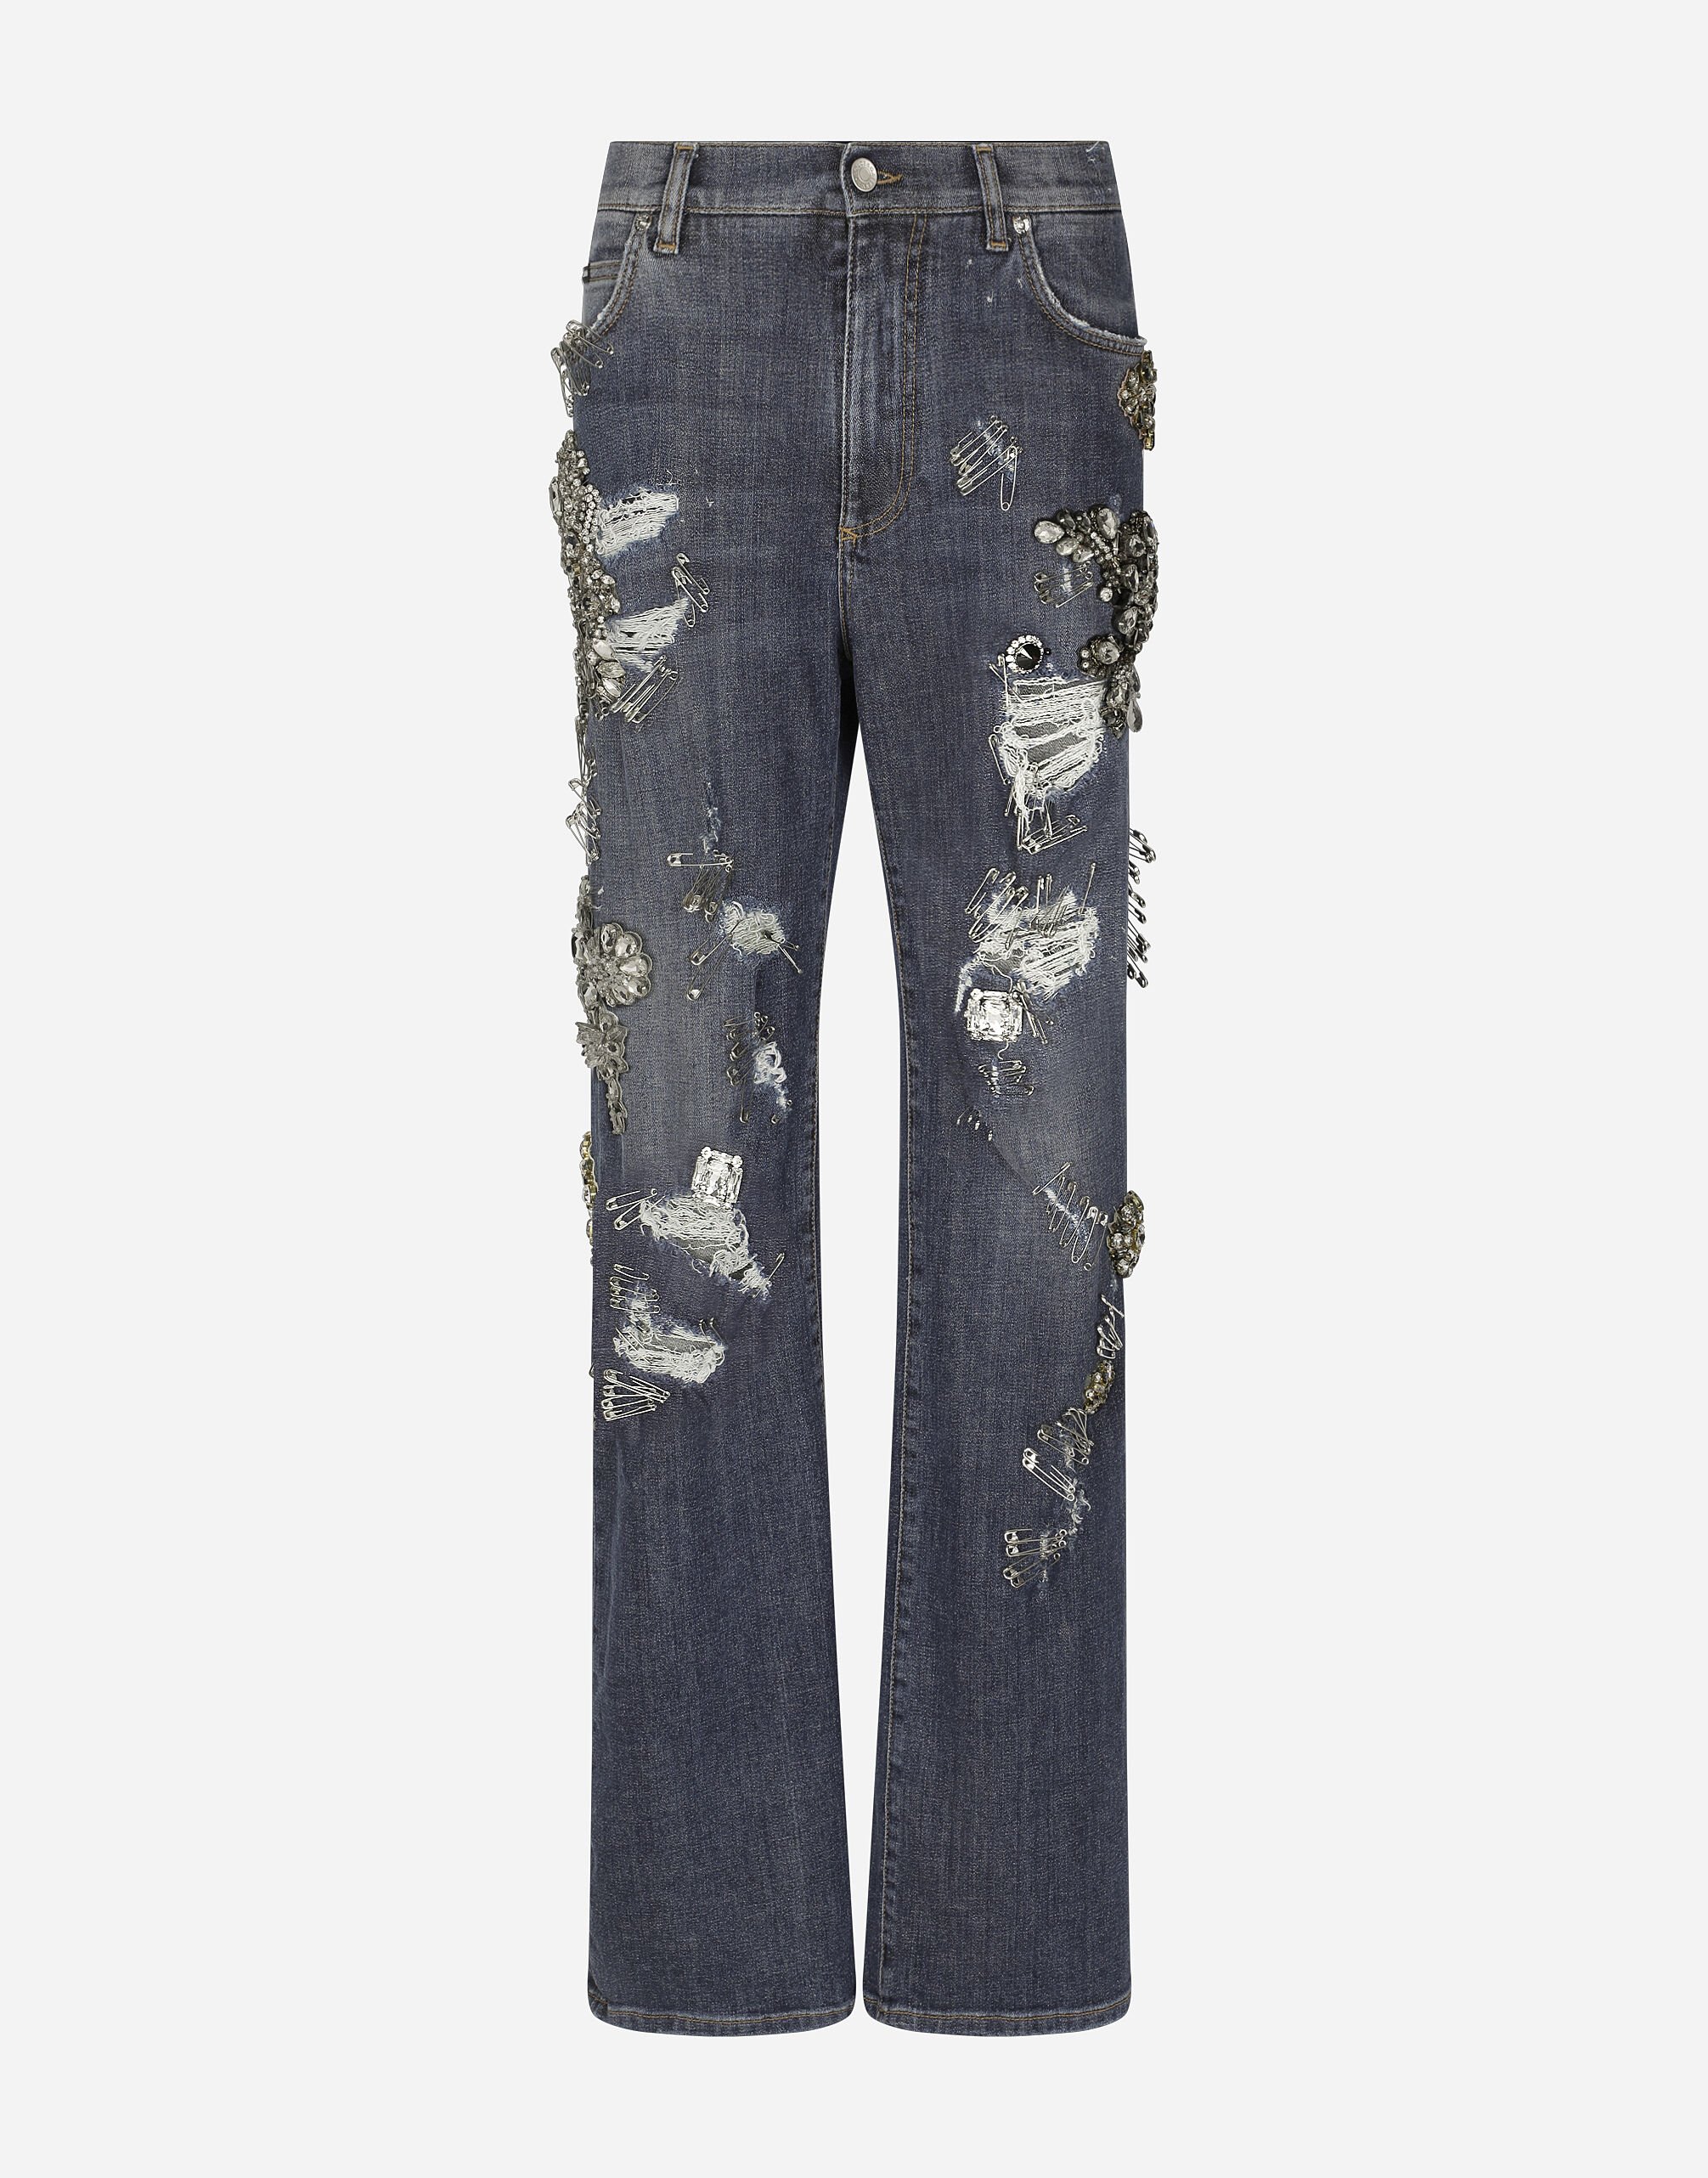 Dolce & Gabbana Denim jeans with ripped details and appliqués Multicolor FTCDDDG8HU3